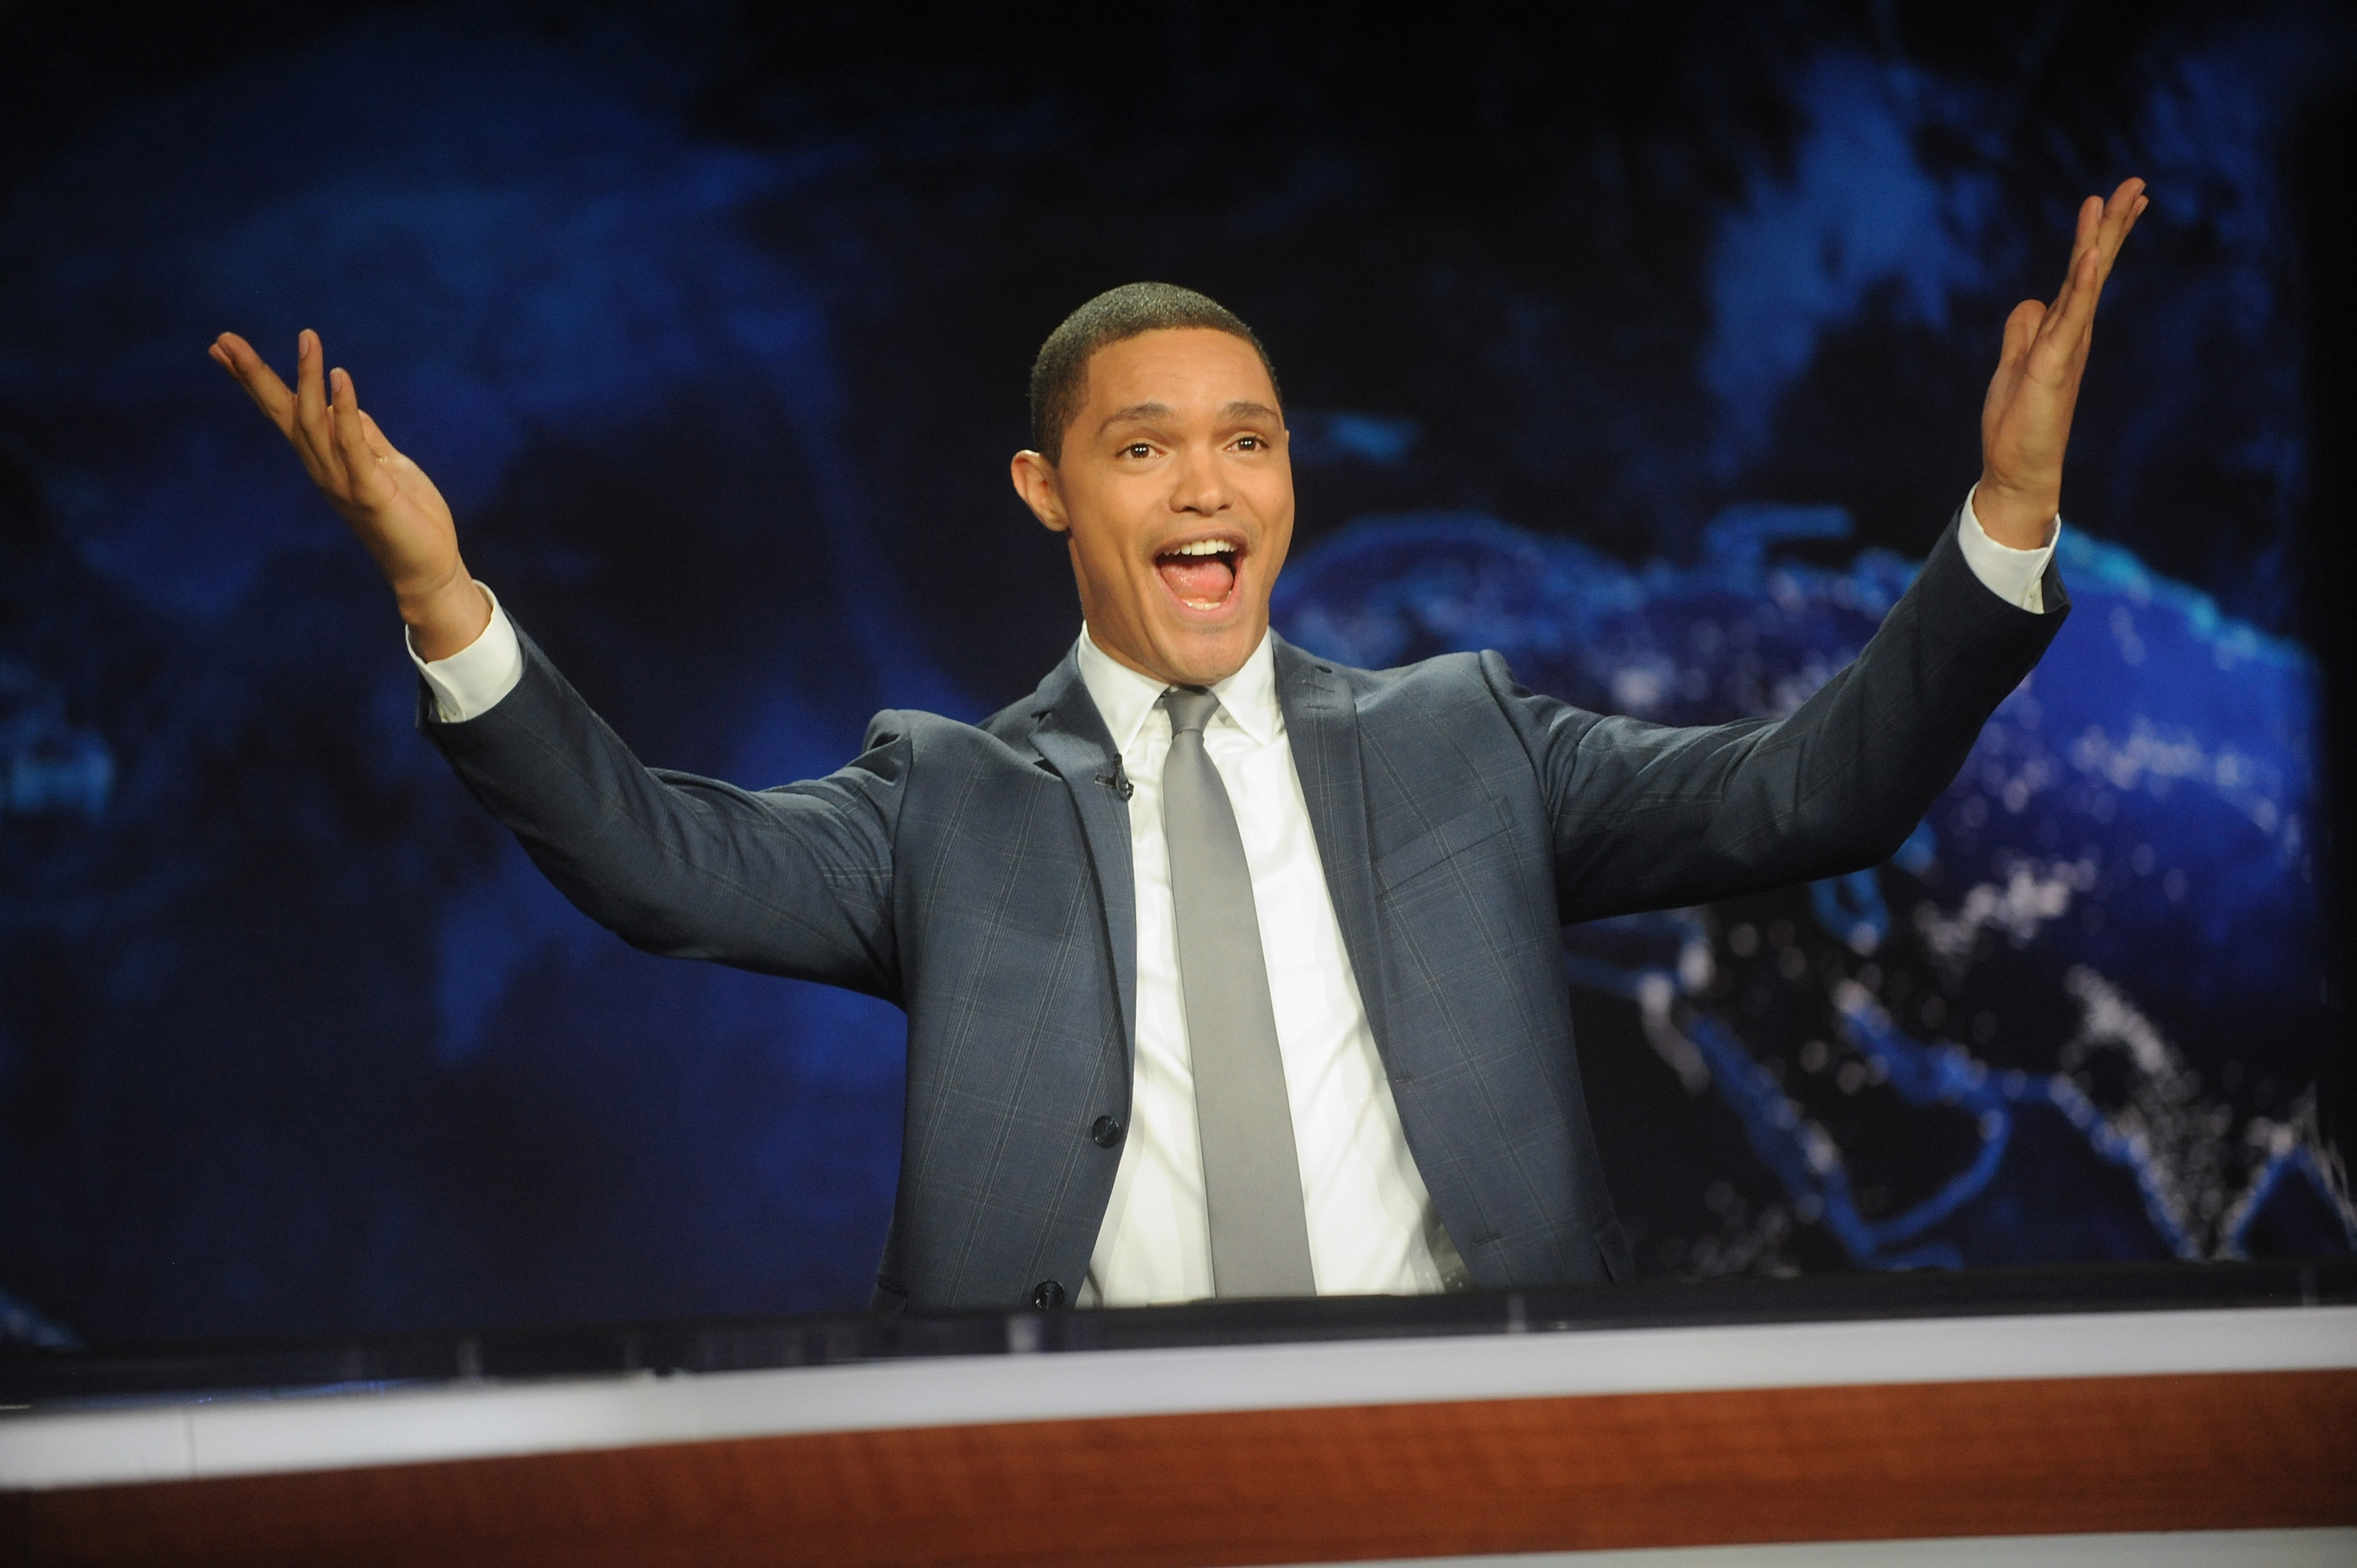 Trevor Noah hosts the "The Daily Show with Trevor Noah" Premiere at The Daily Show with Trevor Noah Studio in New York City, on Sept. 28, 2015 (Brad Barket—Getty Images)